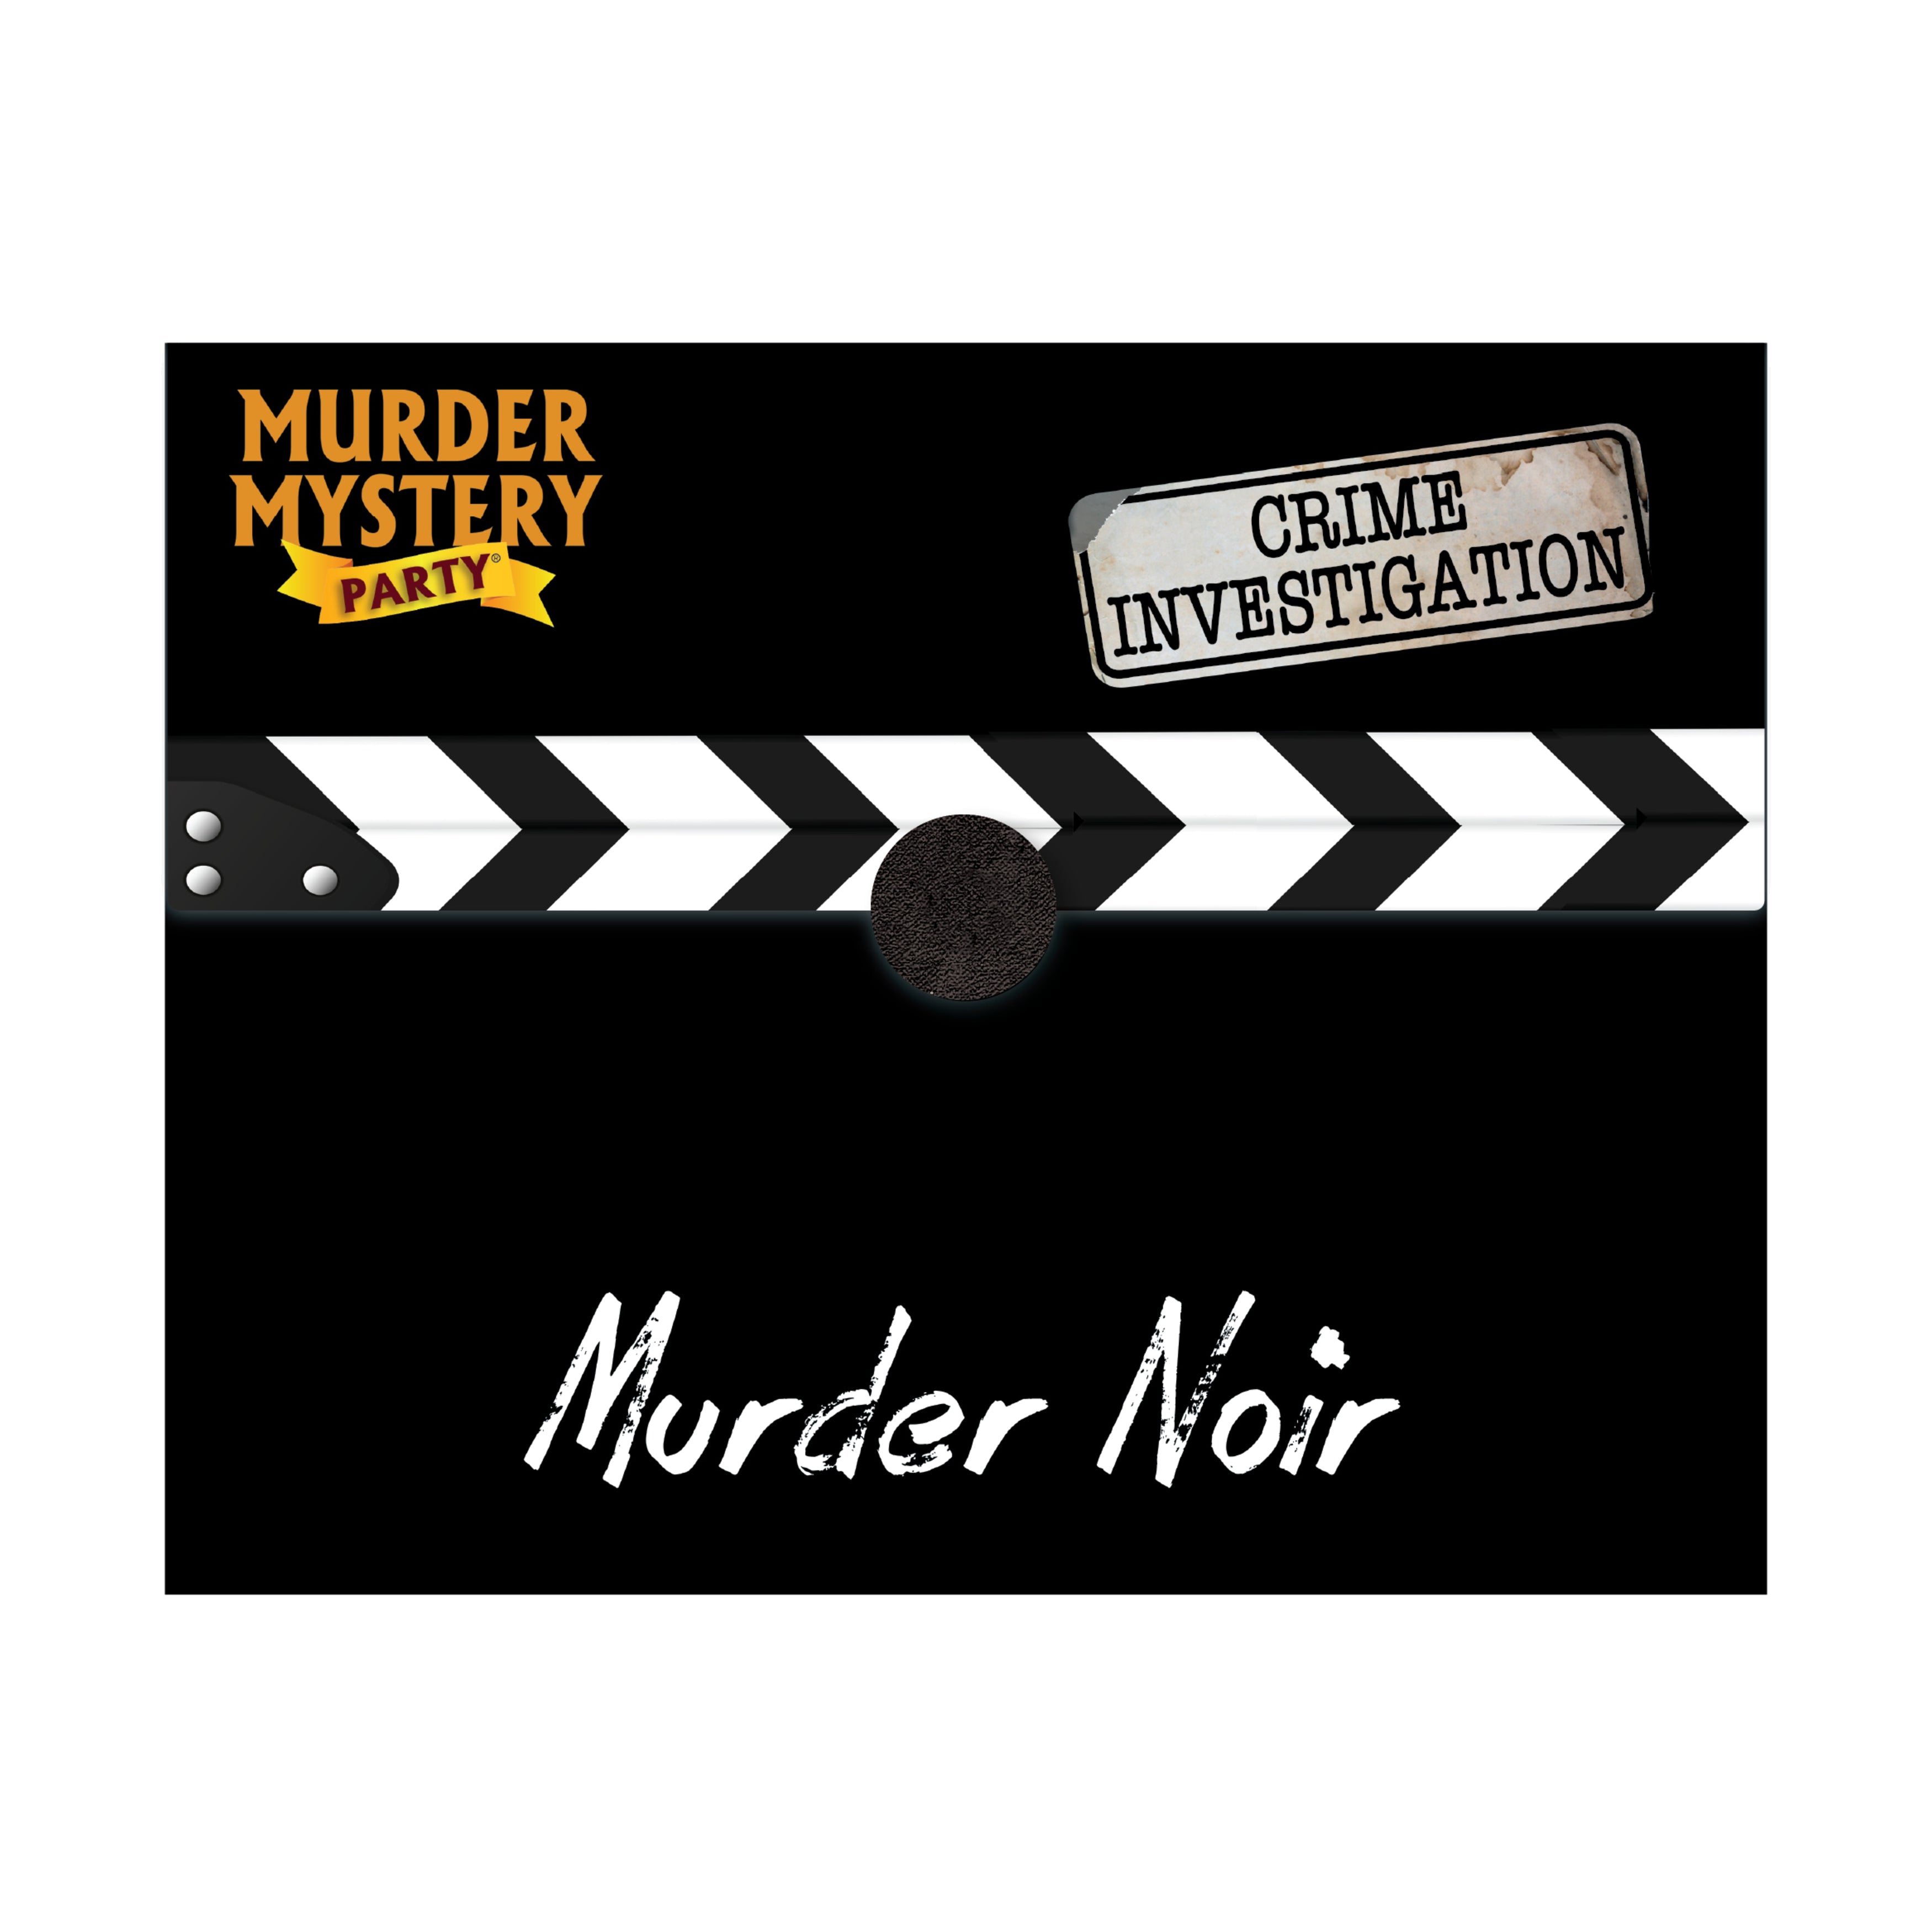 Updated ] Murder Mystery 2 Codes: January 2023 » Gaming Guide